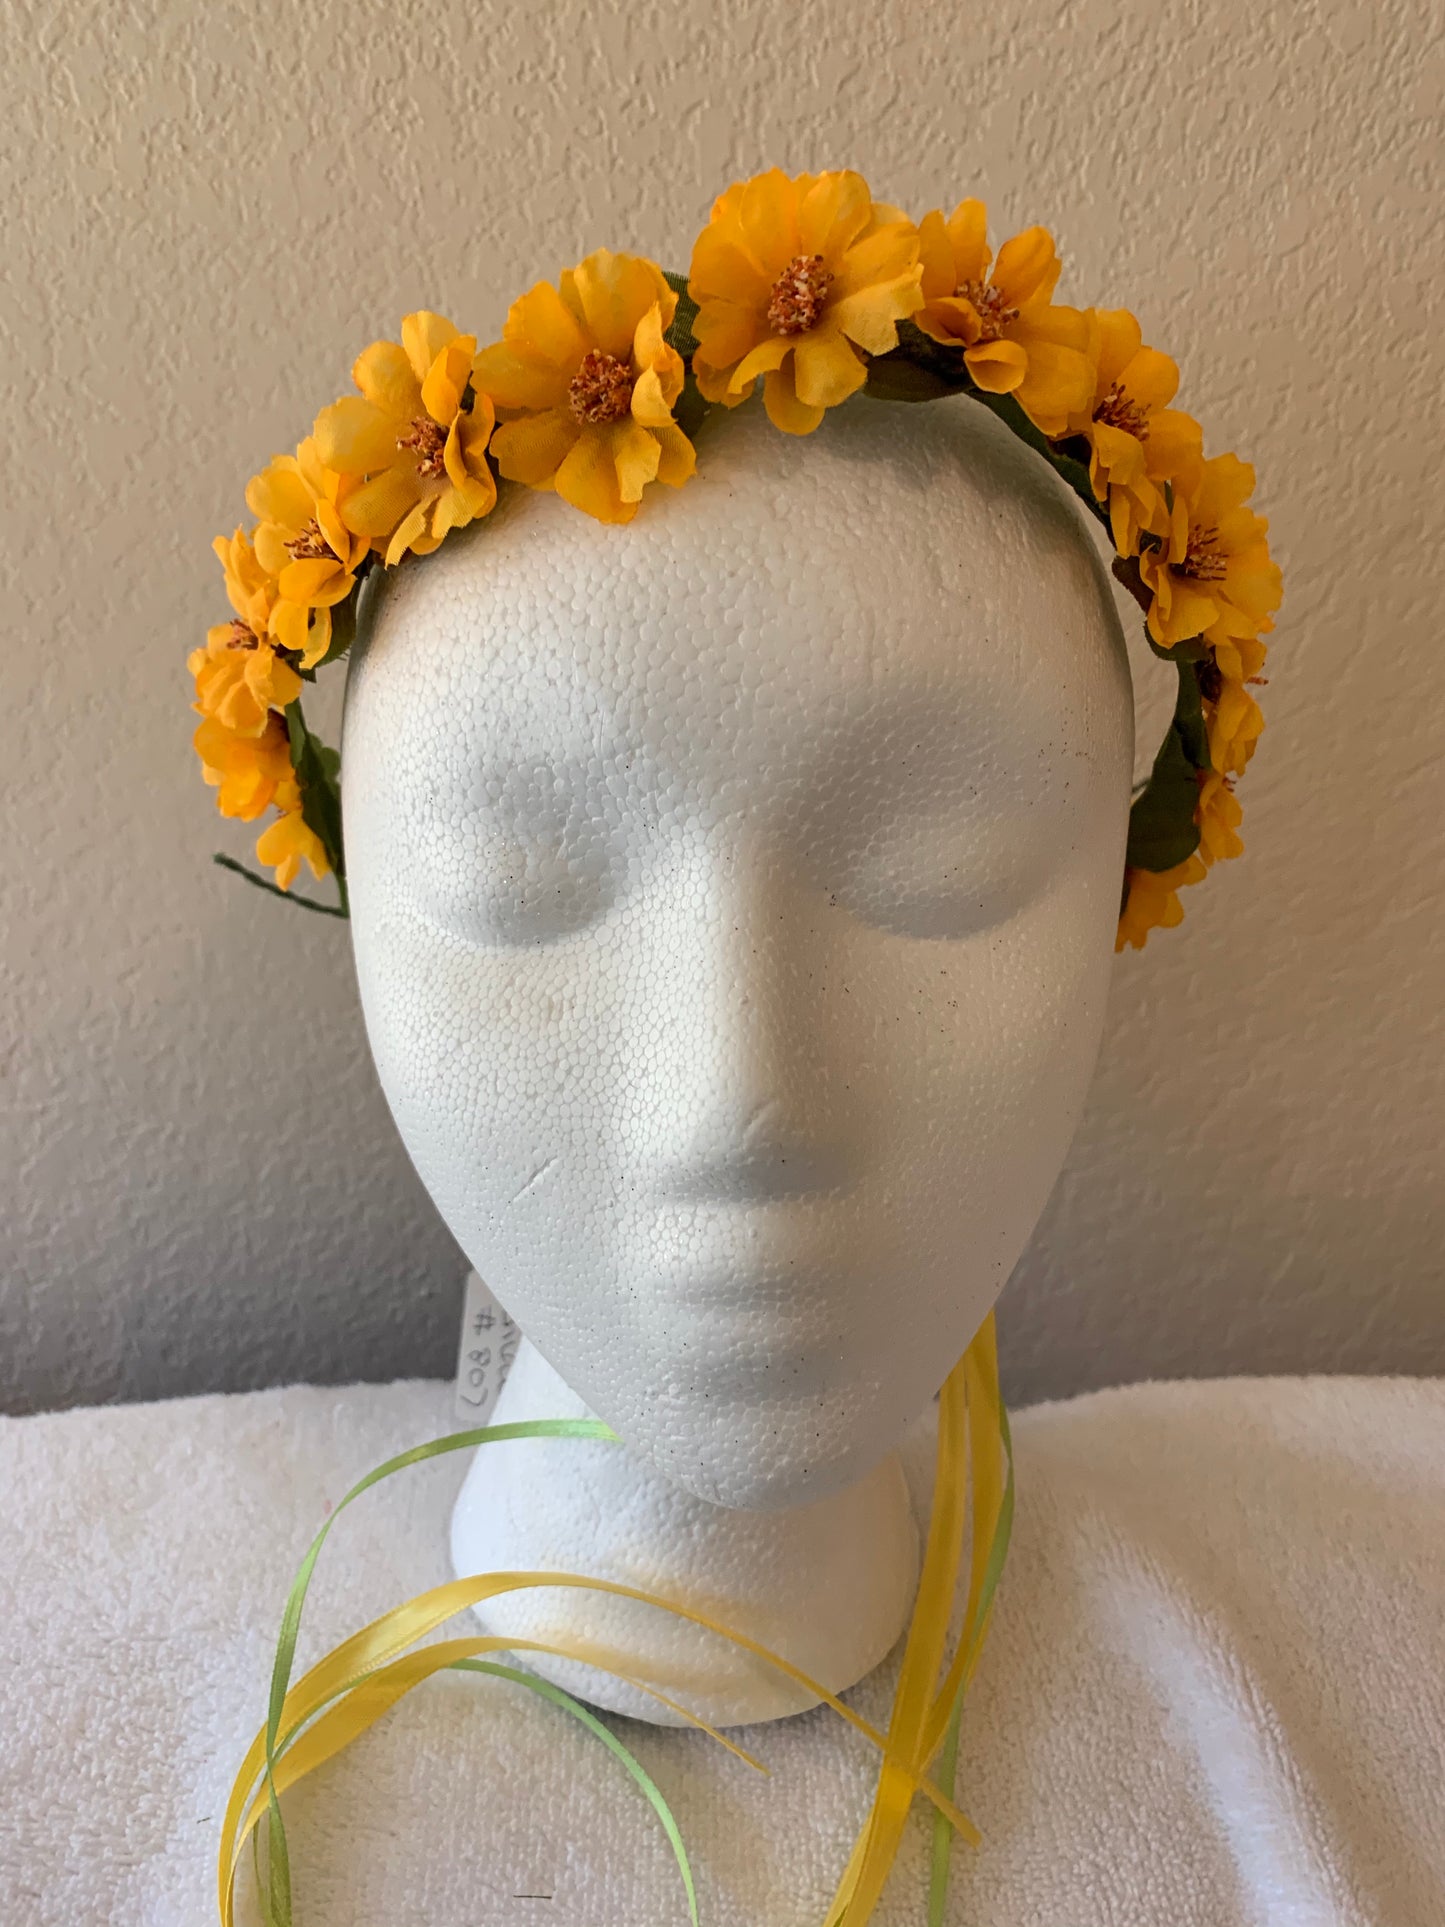 Extra Small Wreath - All Bright Yellow Flowers